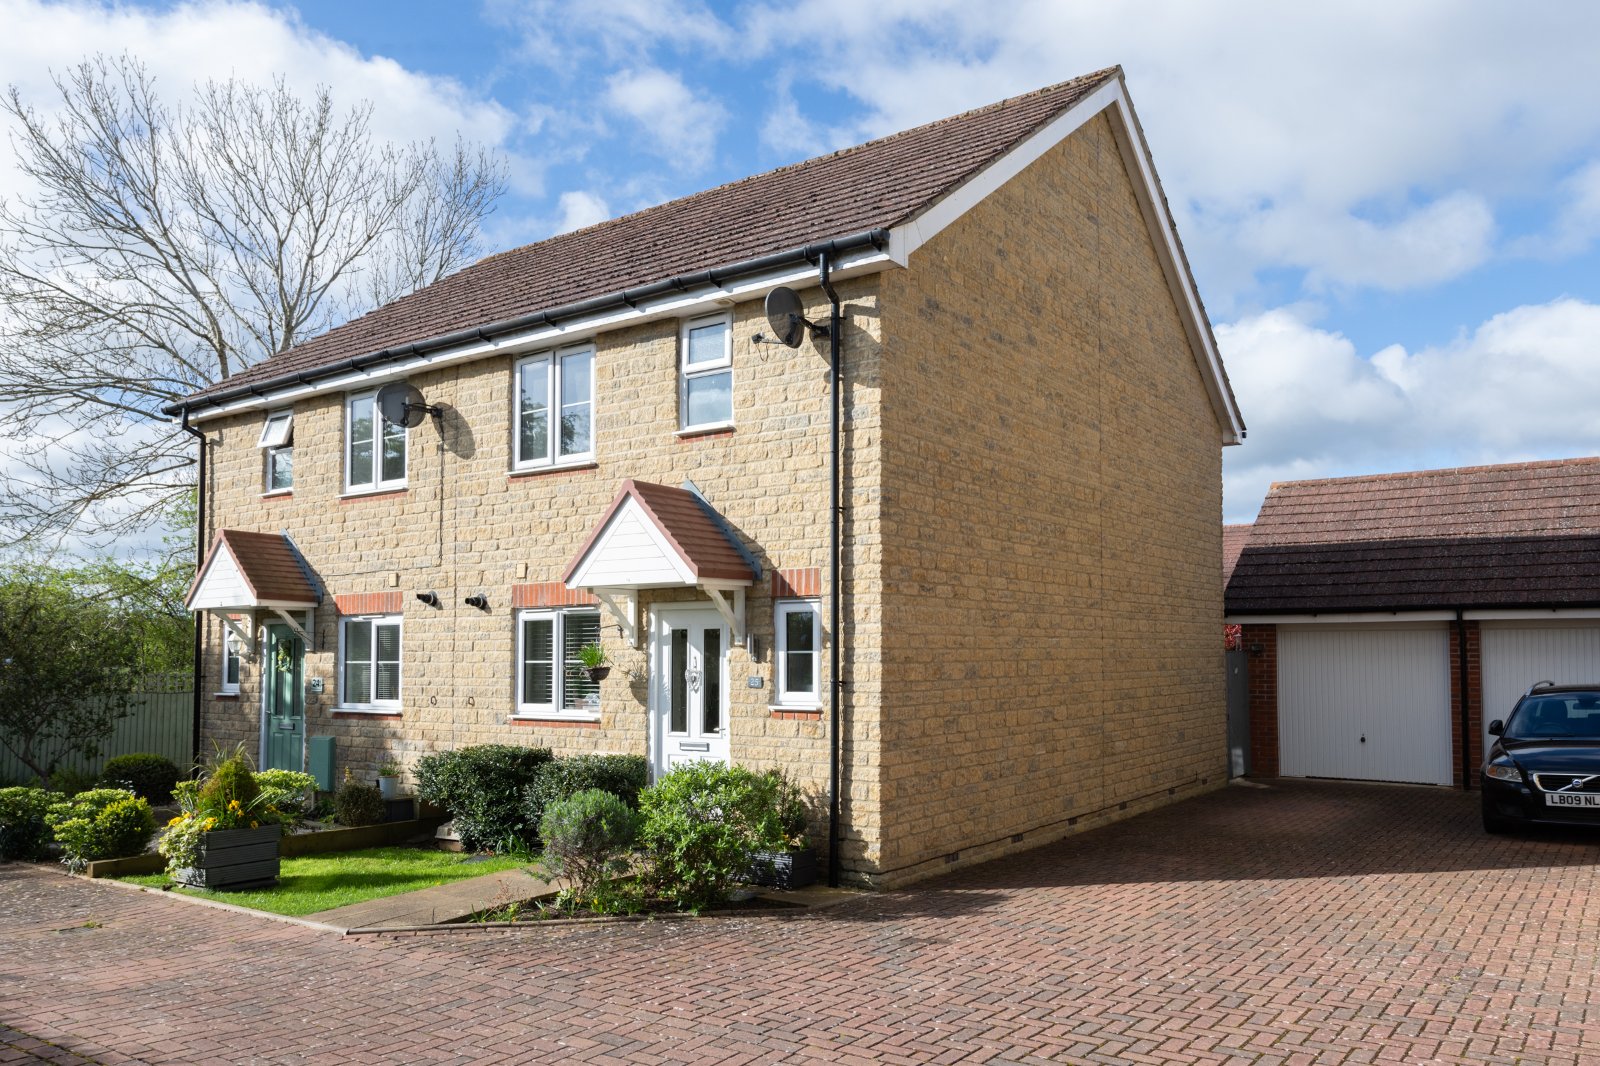 Charlesby Drive, Watchfield, Oxfordshire, SN6